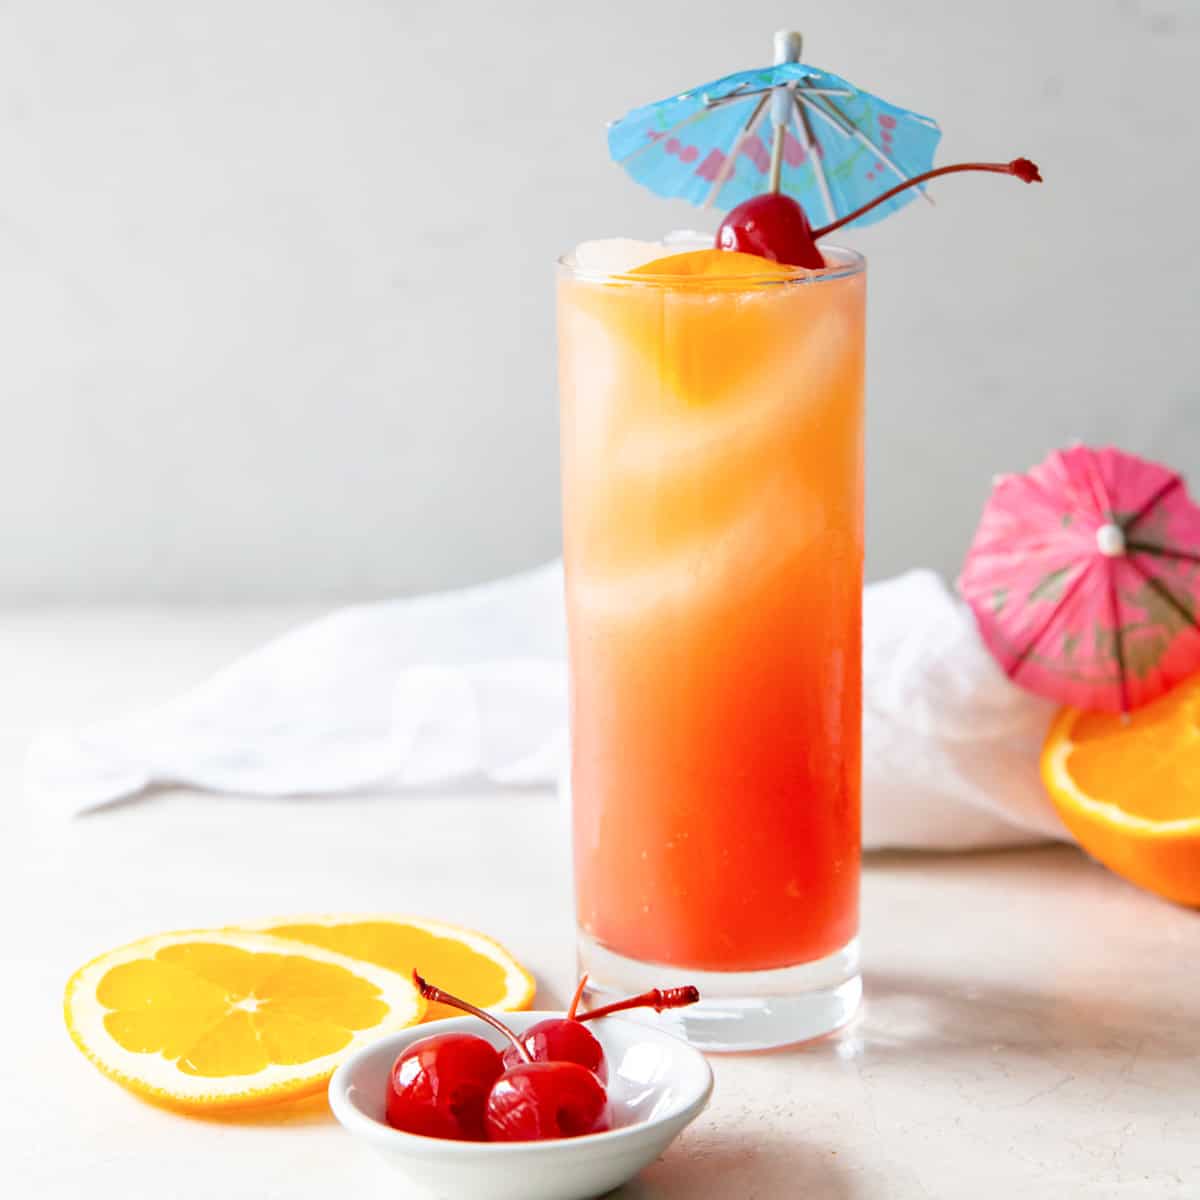 Sex on the Beach Cocktail Recipe image